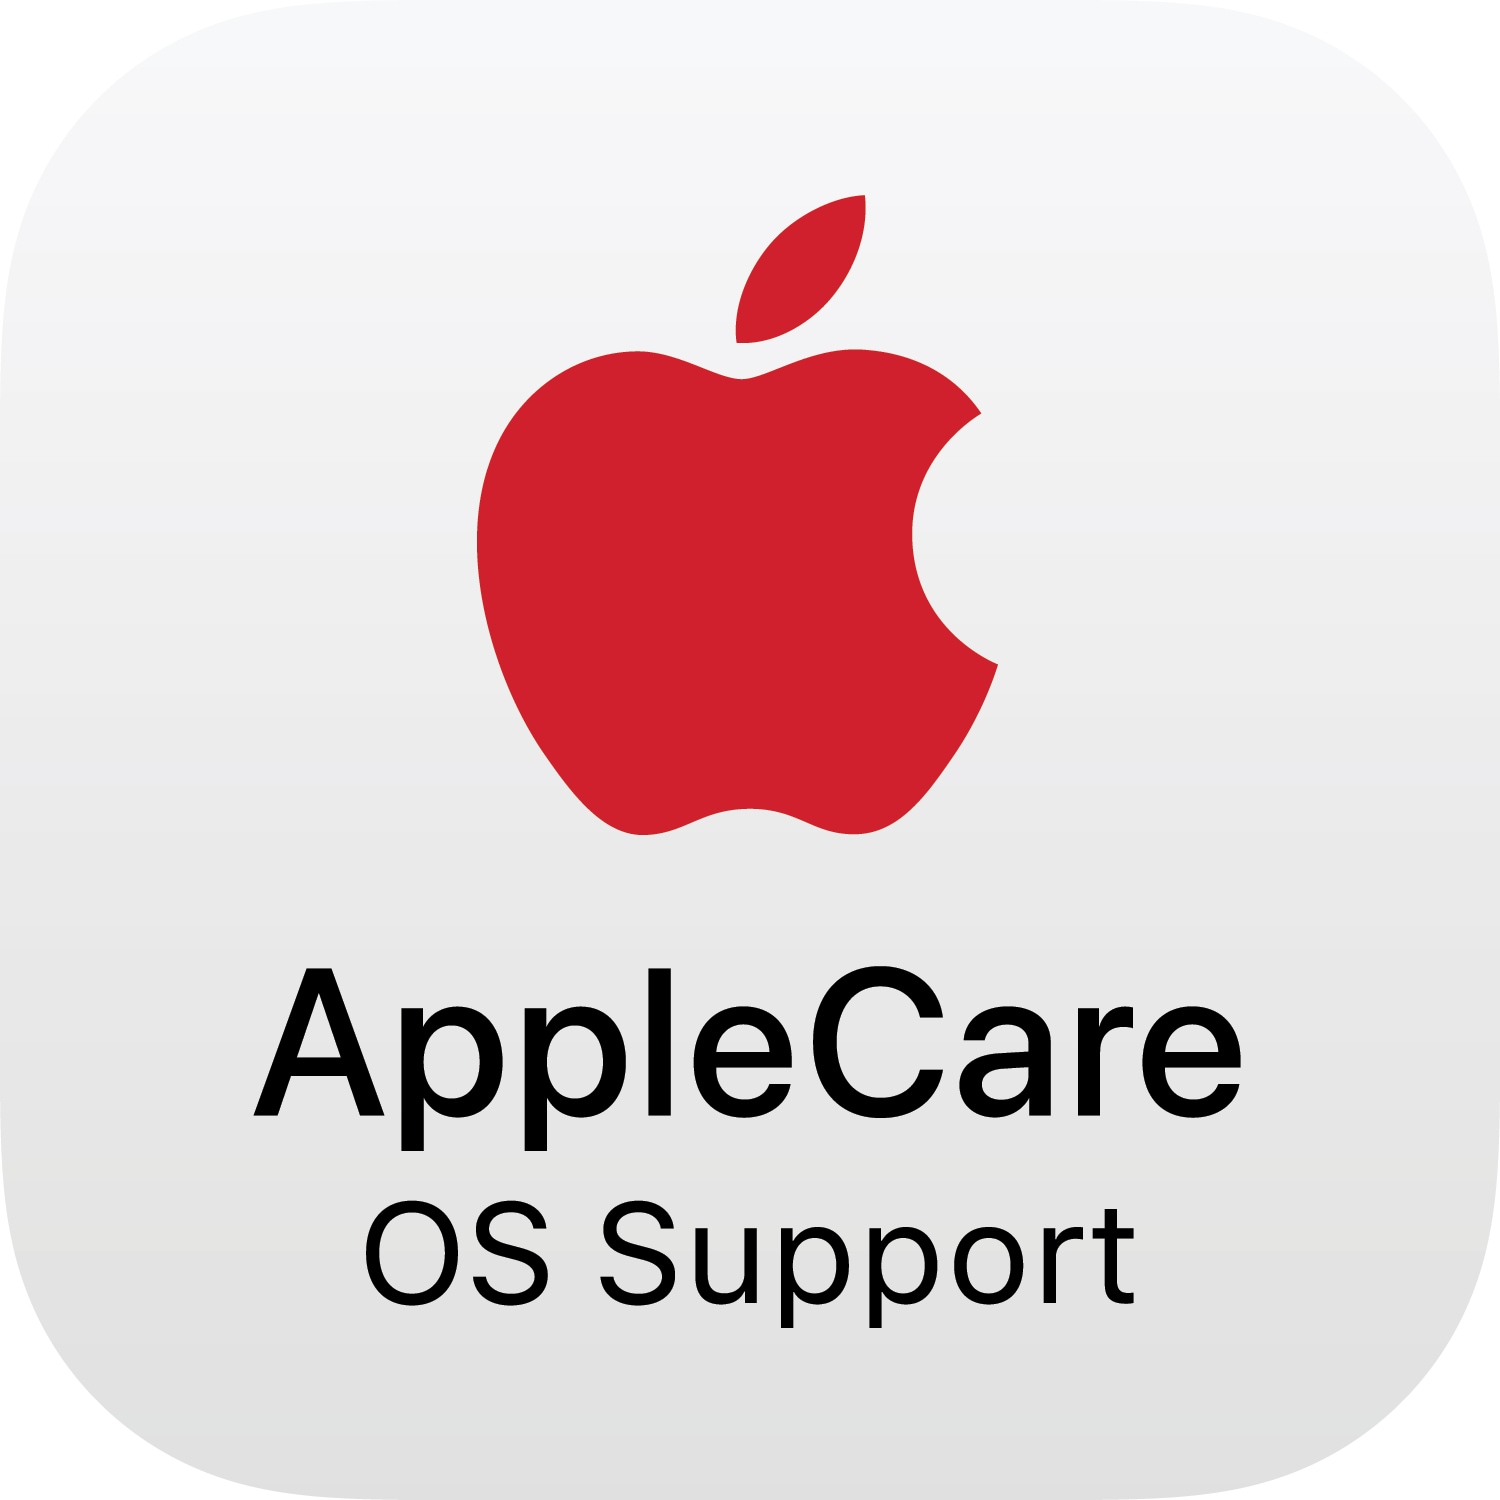 AppleCare OS Support - Alliance - technical support - for Apple Mac OS X Server Software - 3 years